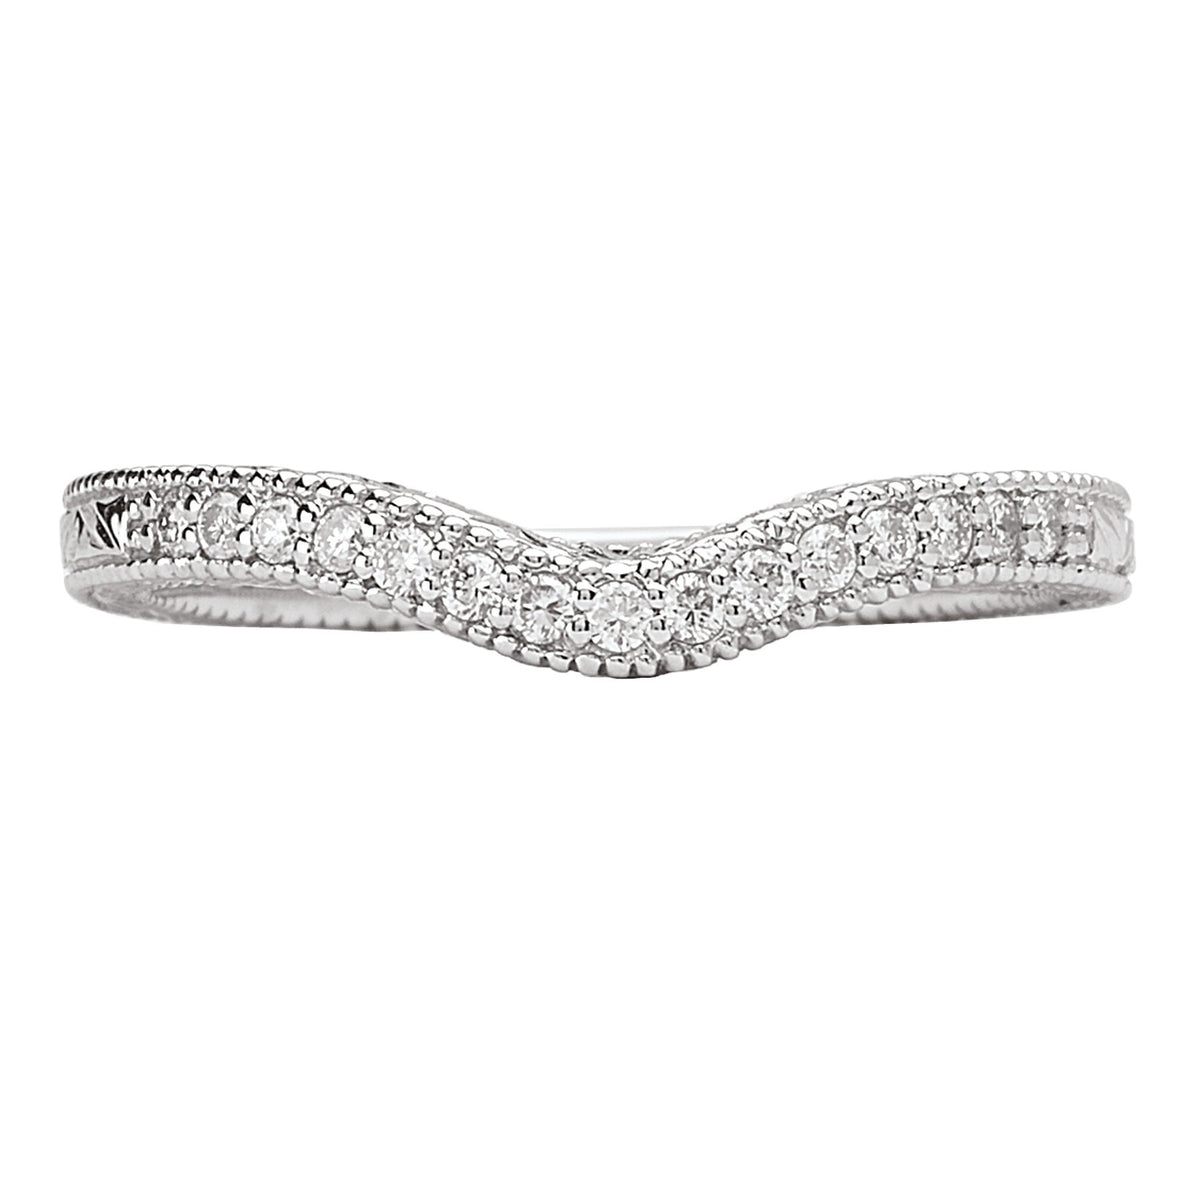 14KT White Gold 1/8 CTW Vintage Curved Wedding Band 4,4.5,5,5.5,6,6.5,7,7.5,8,8.5,9